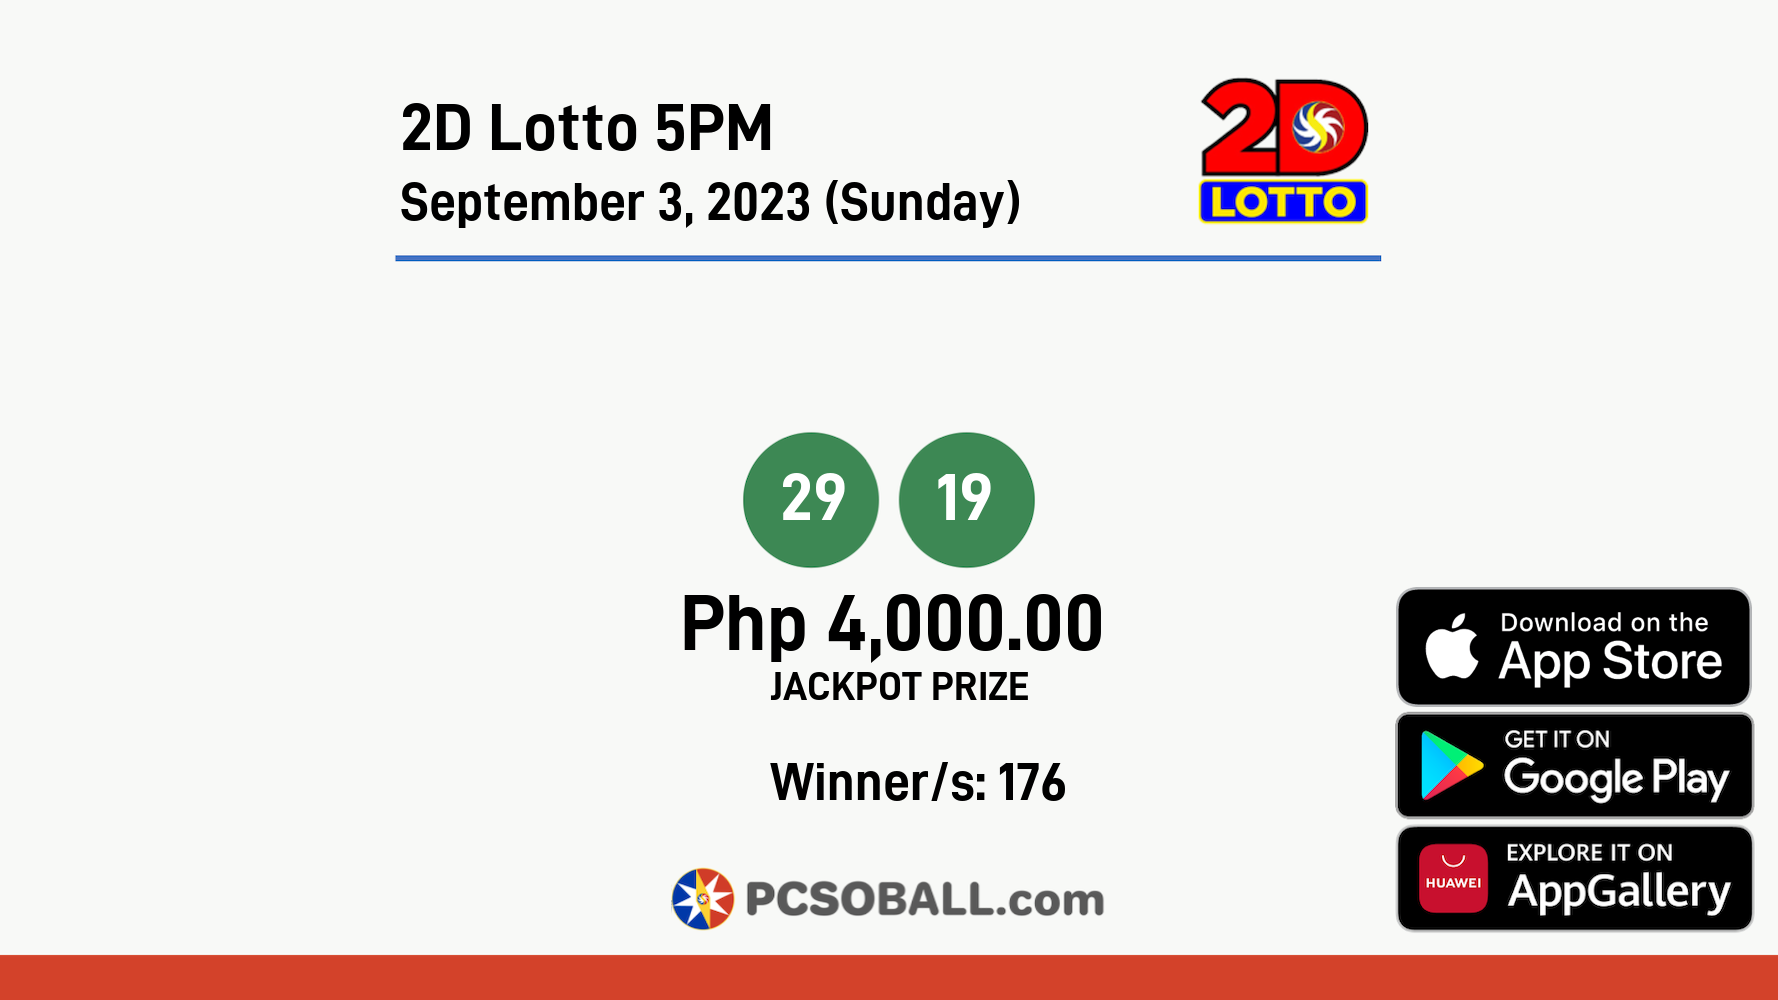 2D Lotto 5PM September 3, 2023 (Sunday) Result